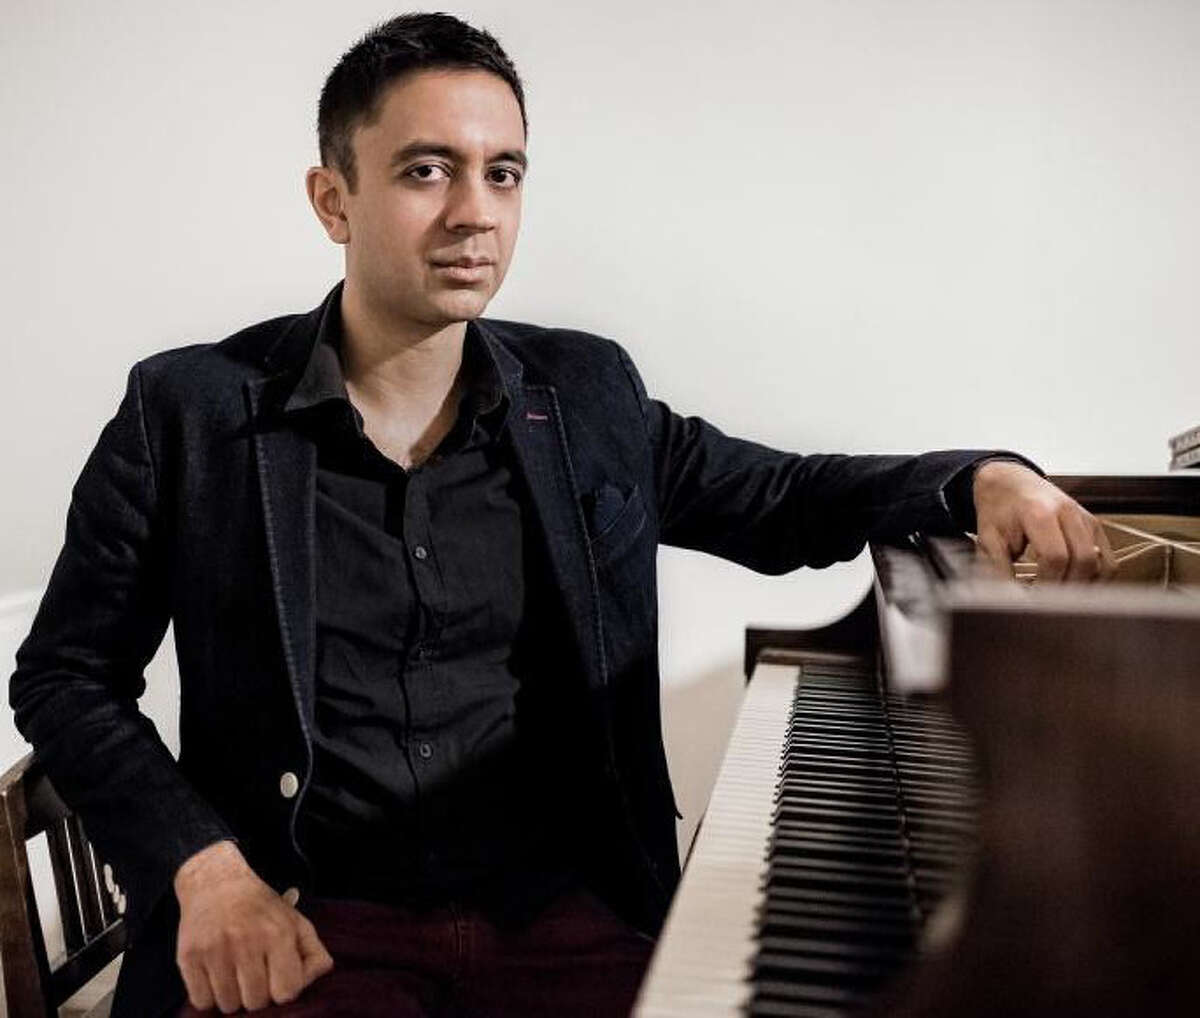 Jazz pianist Vijay Iyer is scheduled to perform during the Carver's 2014-15 season.